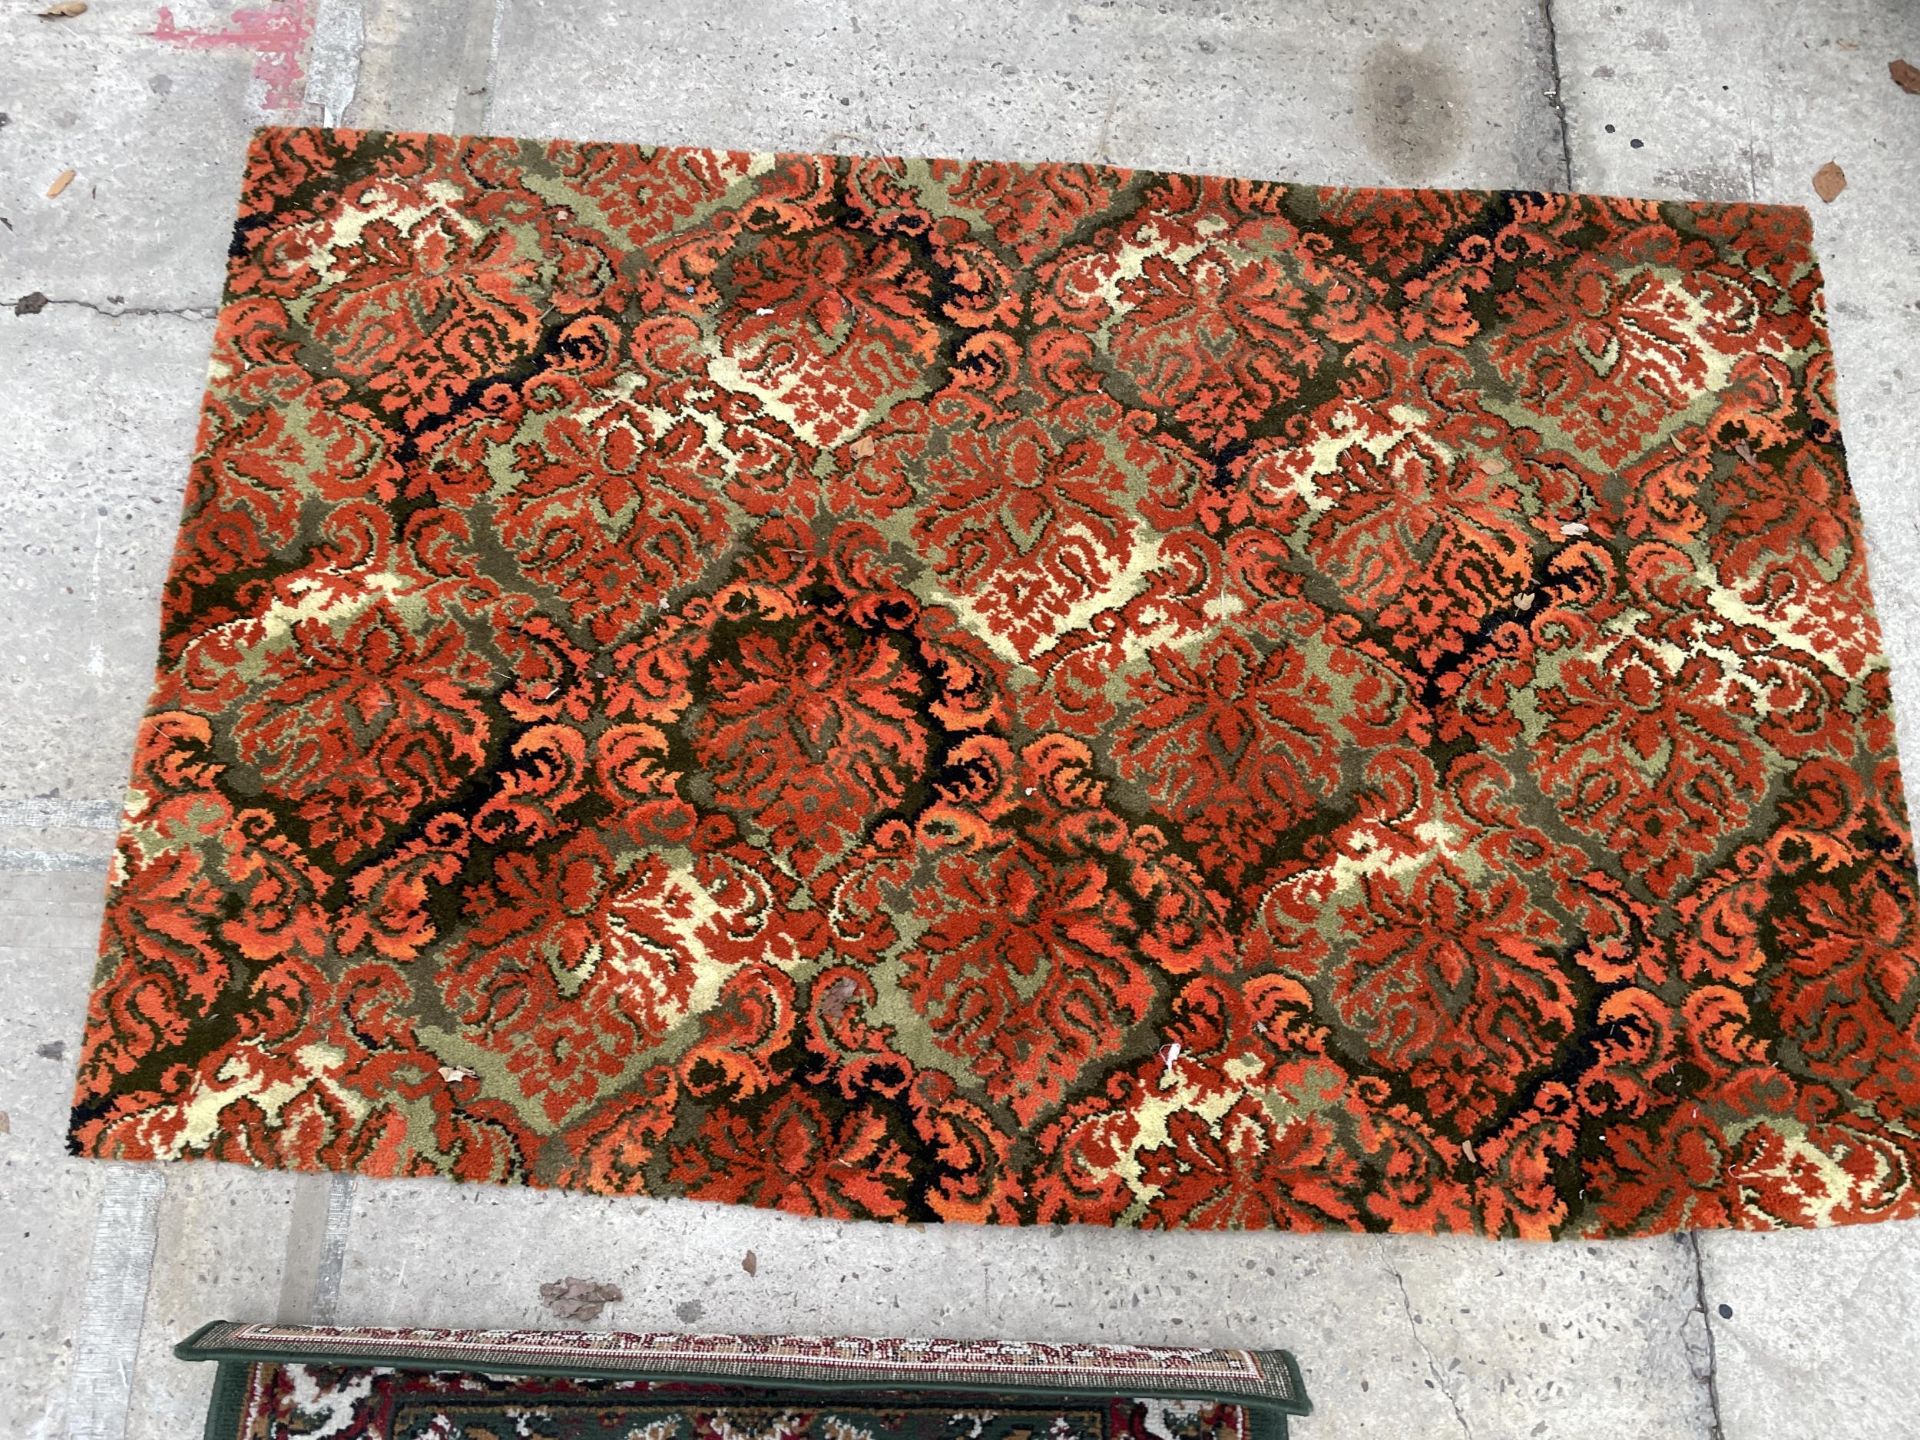 A GREEN PATTERNED RUG AND AN ORANGE PATTERNED RUG - Image 3 of 3